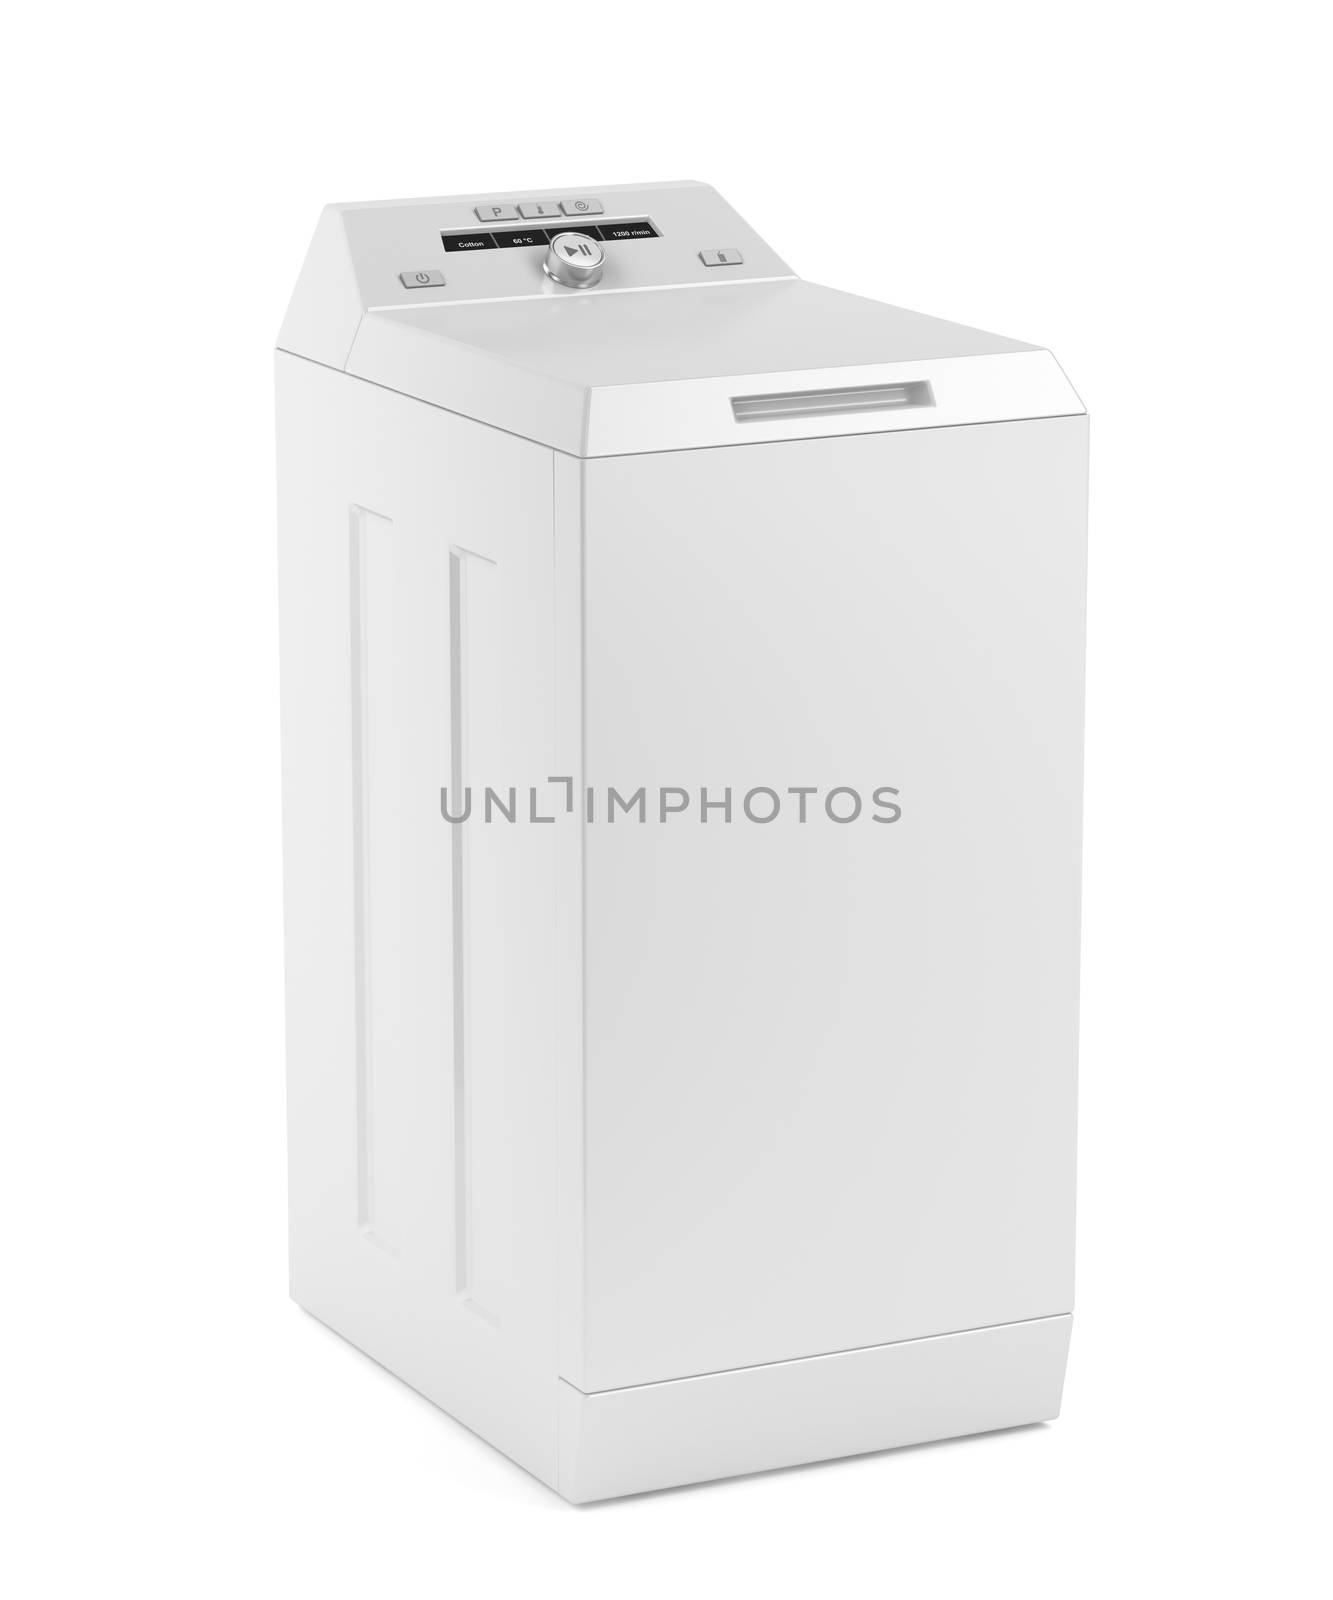 Top loading washing machine by magraphics